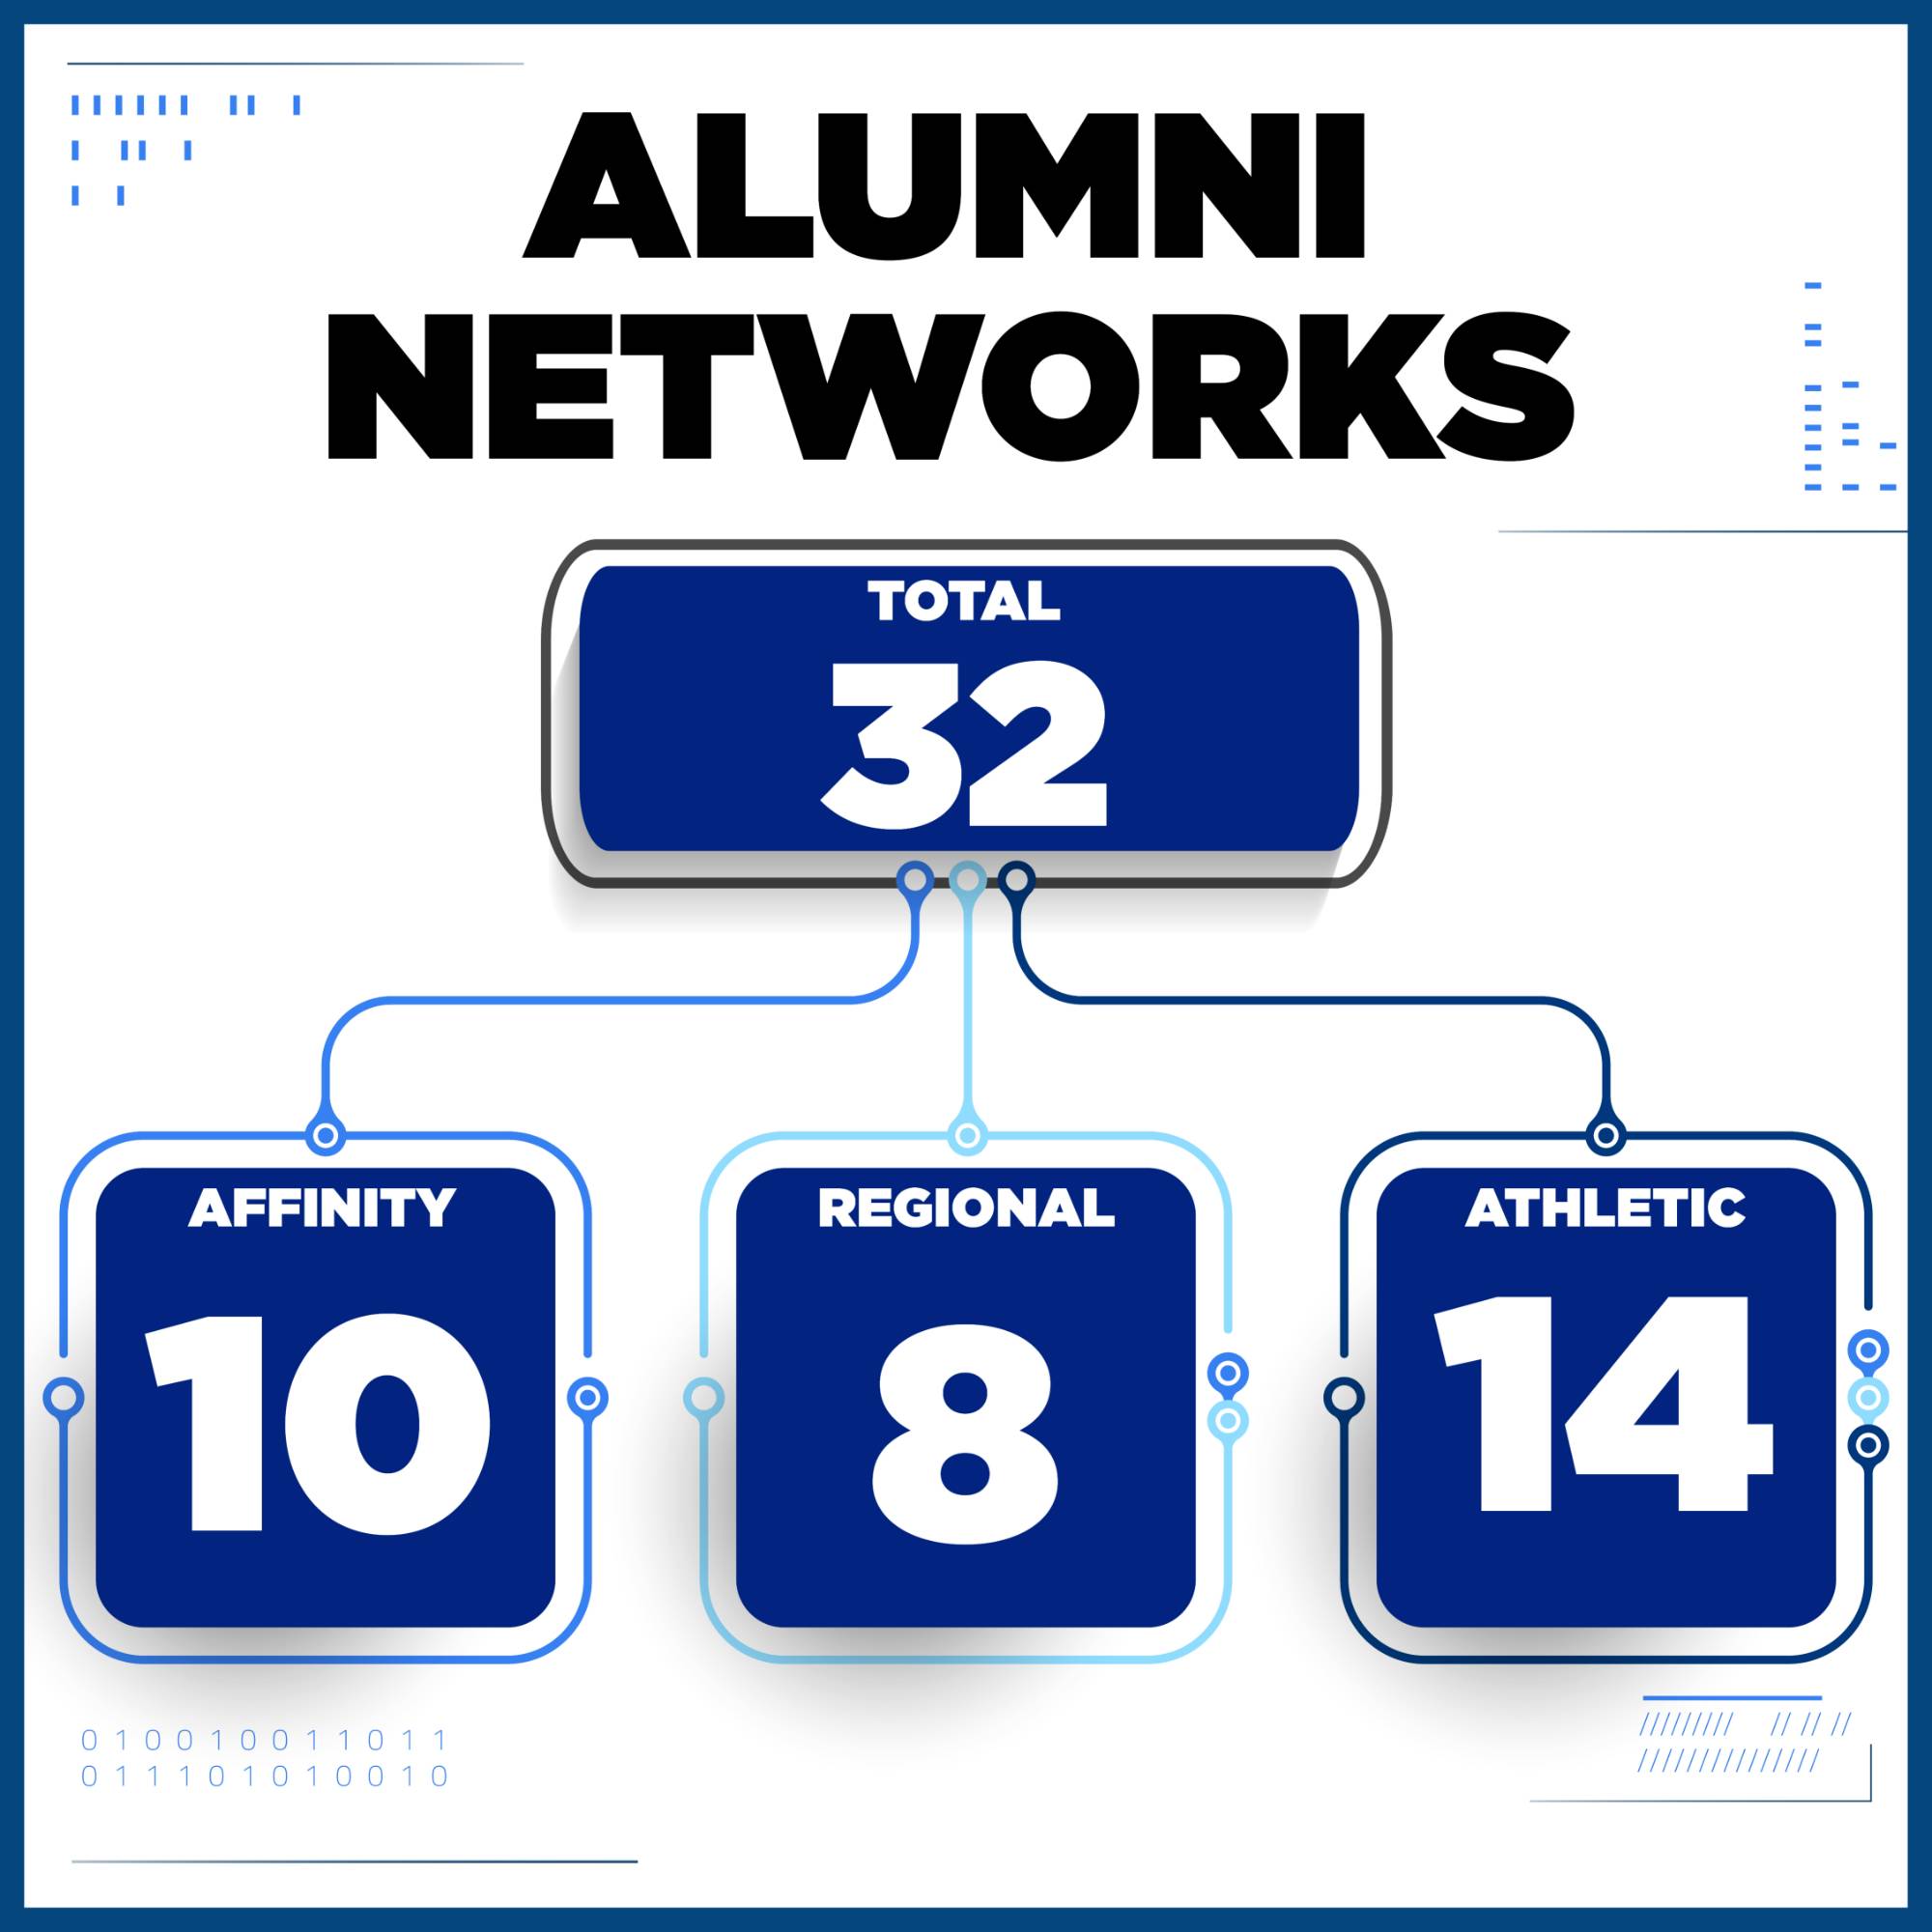 We have a total of 32 Alumni Networks. Of these networks, 10 are Affinity Networks, 8 are Regional Networks, and 14 are Athletic Networks.